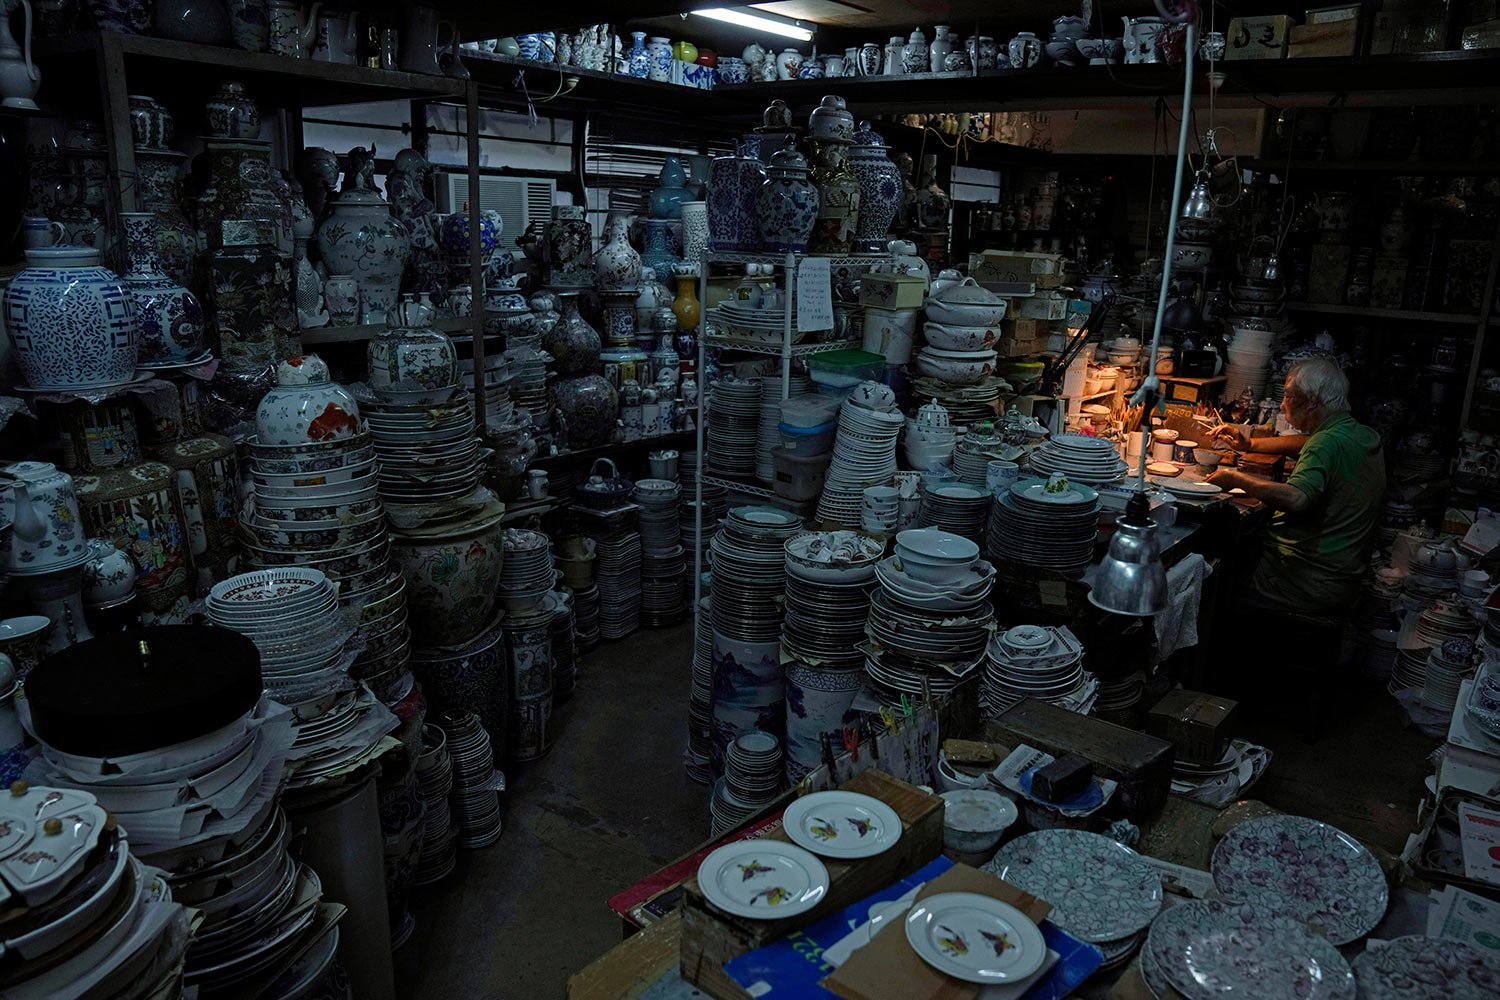  A staff member works at the Yuet Tung China Works, Hong Kong's porcelain factory, in Hong Kong, Wednesday, June 8, 2022.   (AP Photo/Kin Cheung) 